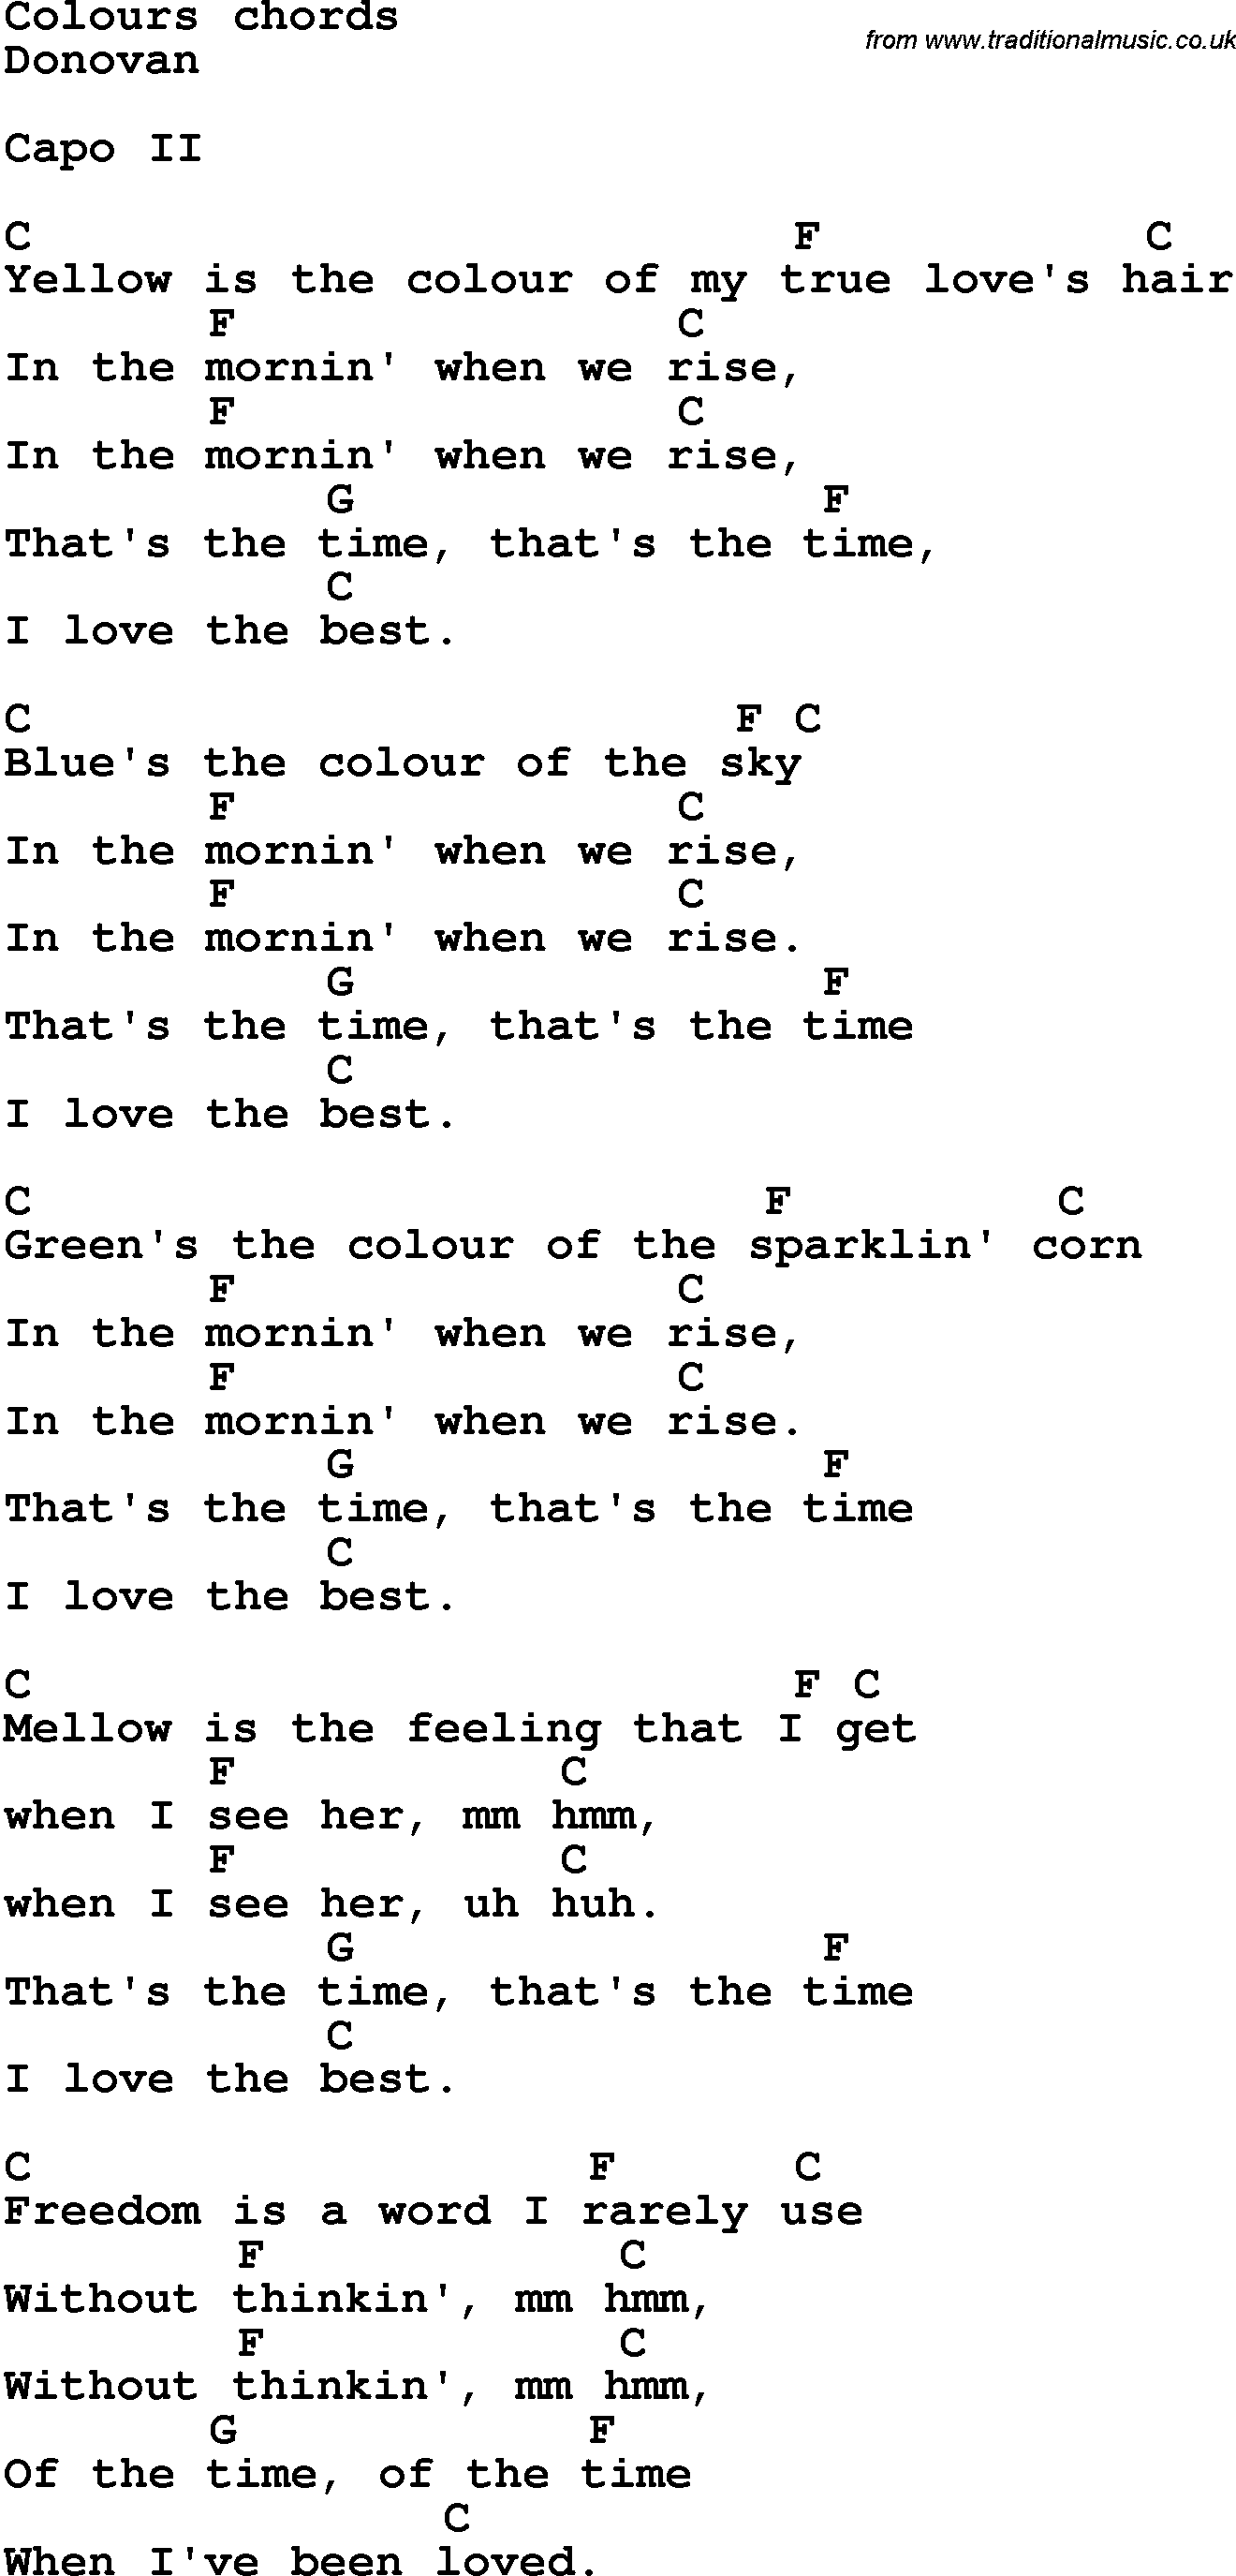 Song Lyrics with guitar chords for Colours - Donovan